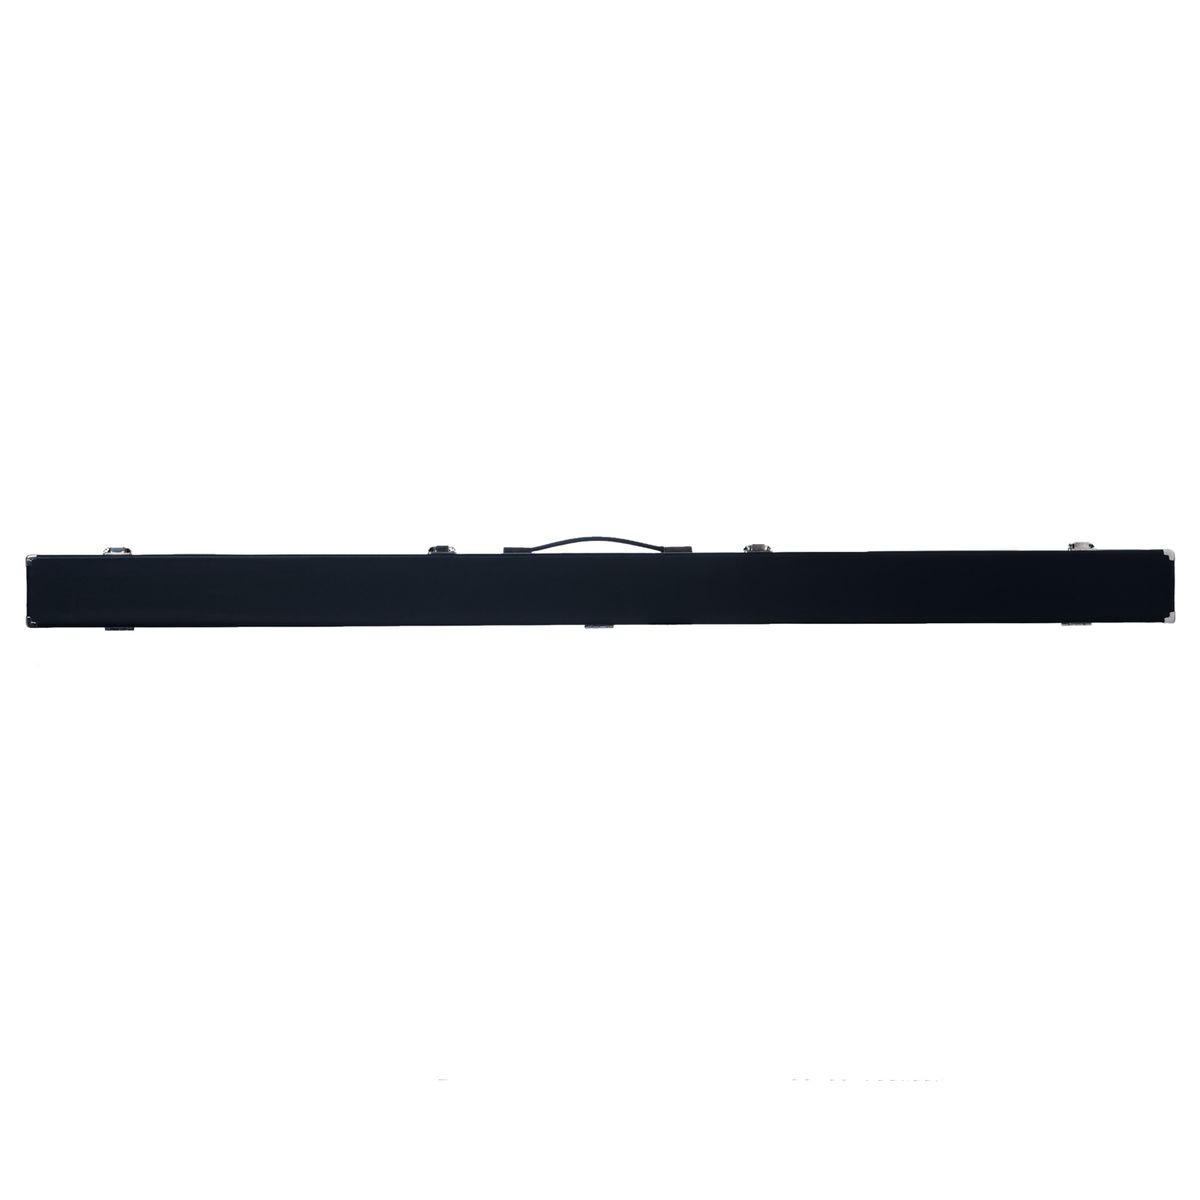 Hurricane Pool/Snooker Cue Case Black for 3/4 Jointed Cue | Shop Today ...